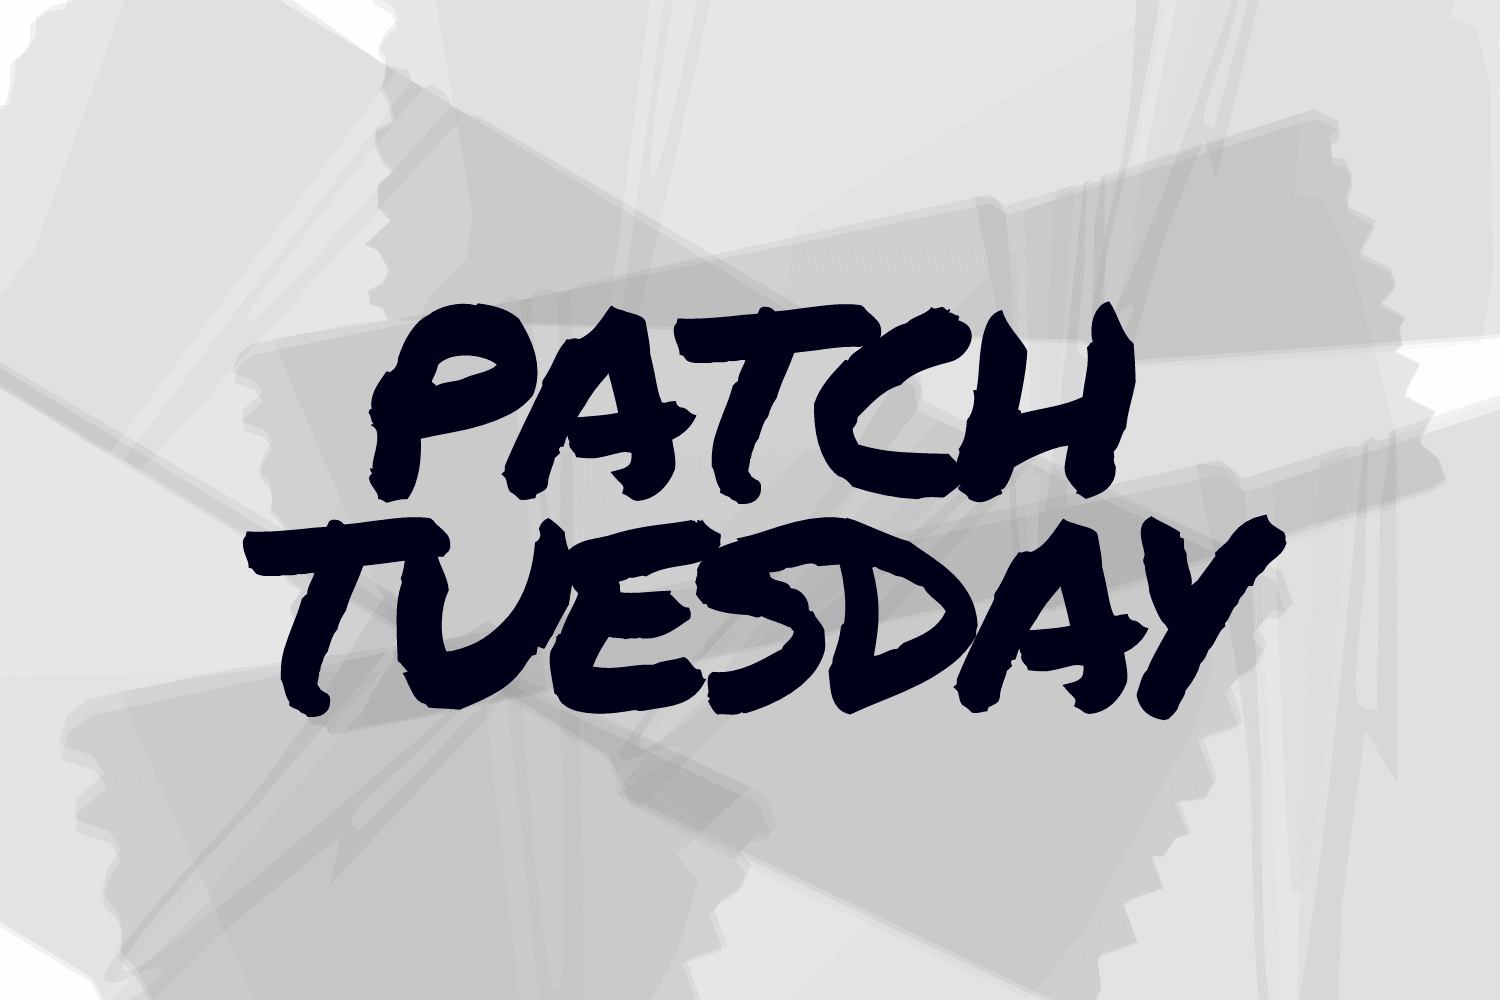 how-important-was-this-microsoft-patch-tuesday-adnet